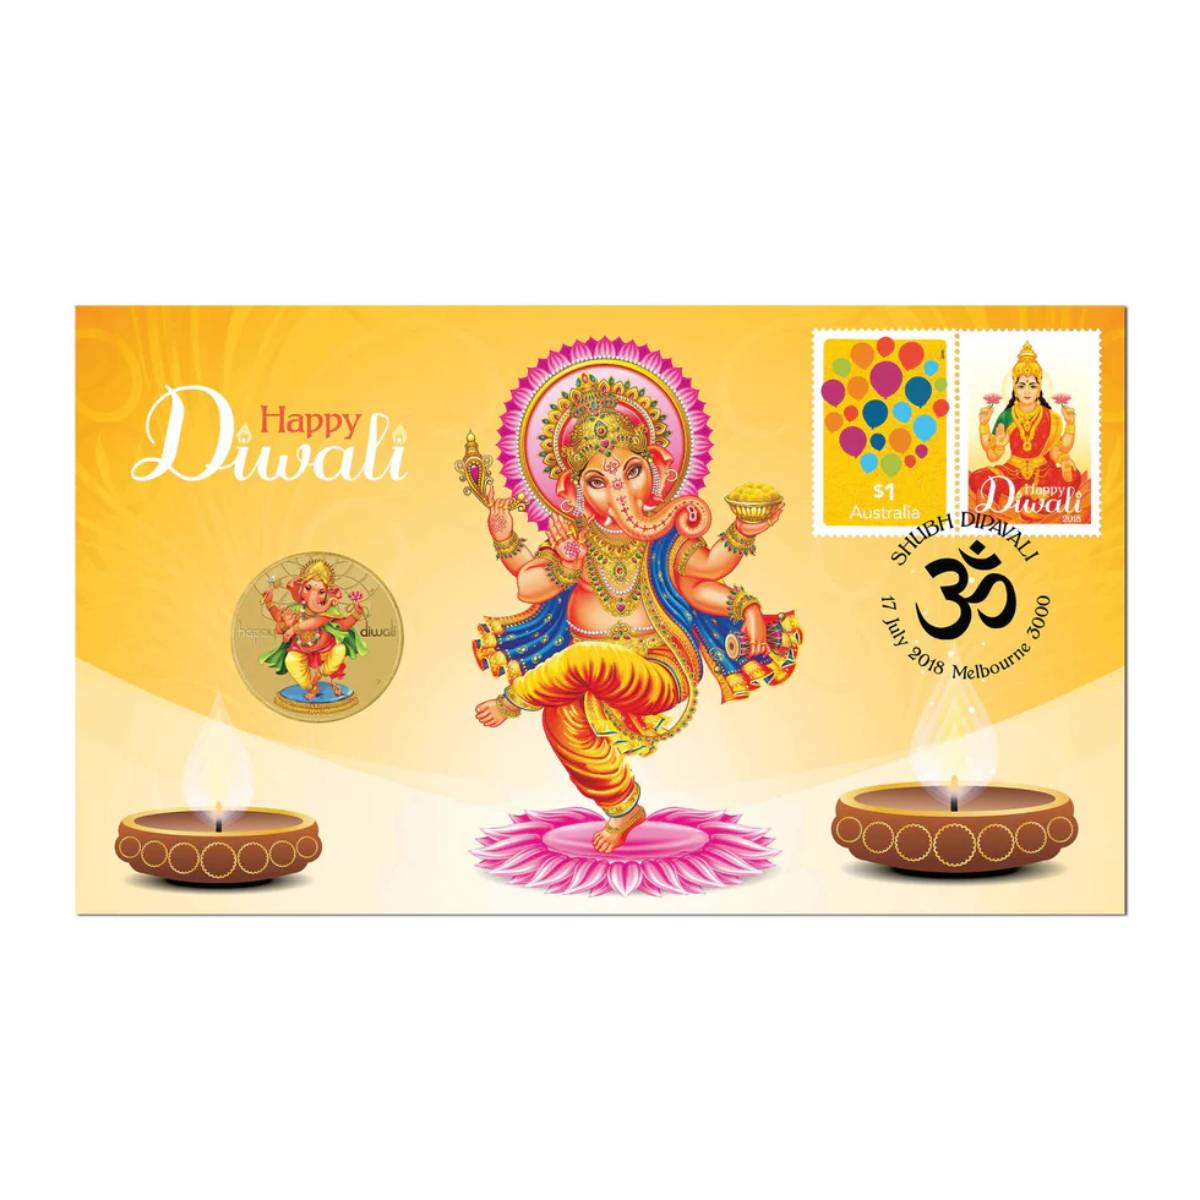 Diwali Festival 2018 $1 Stamp & Coin Cover